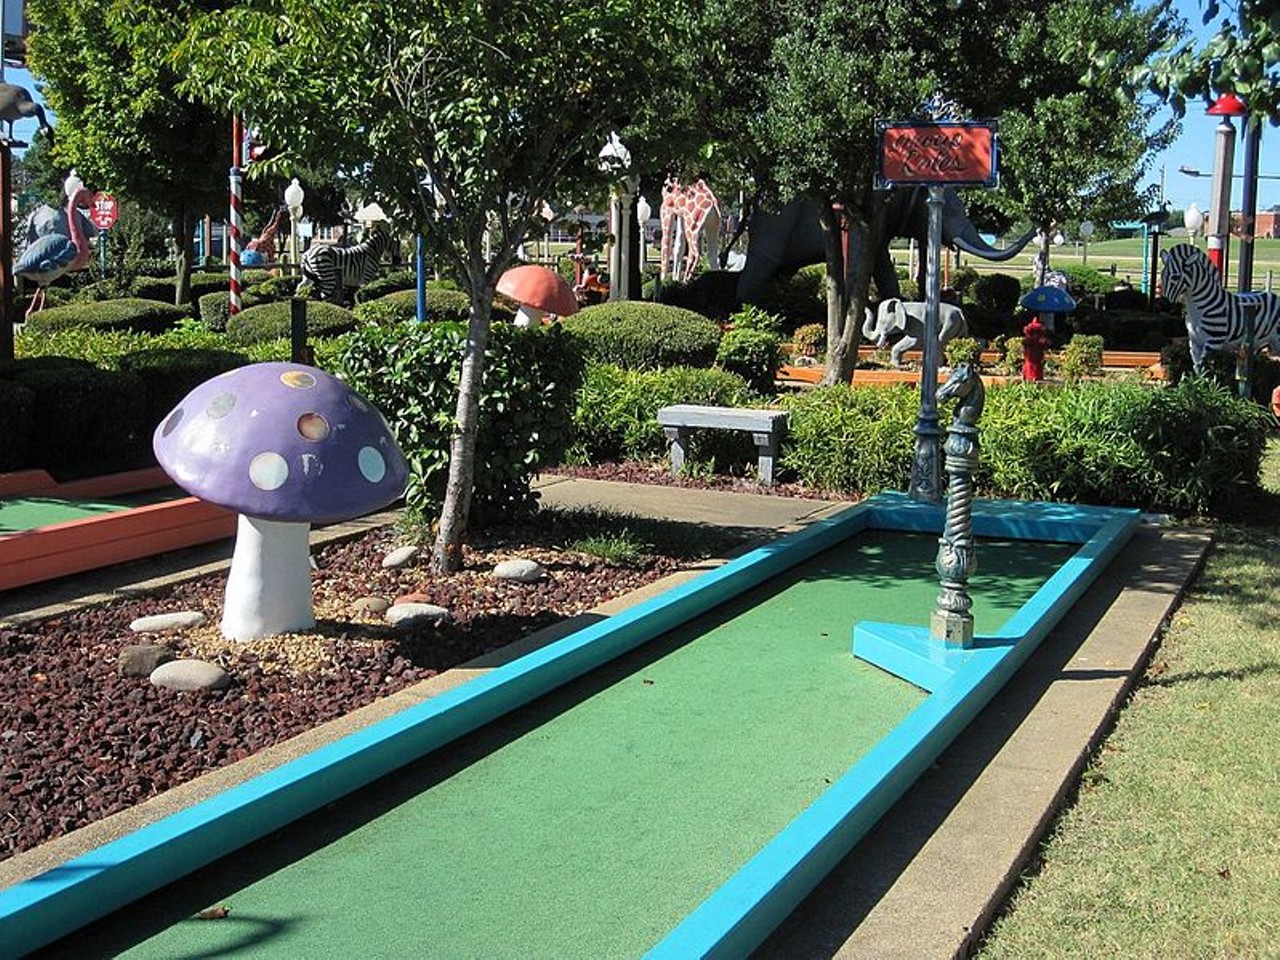 In Detroit, putt-putt golf courses must close by 1:00 AM.
They had to regulate that? Who’s going drunken putt-putting?